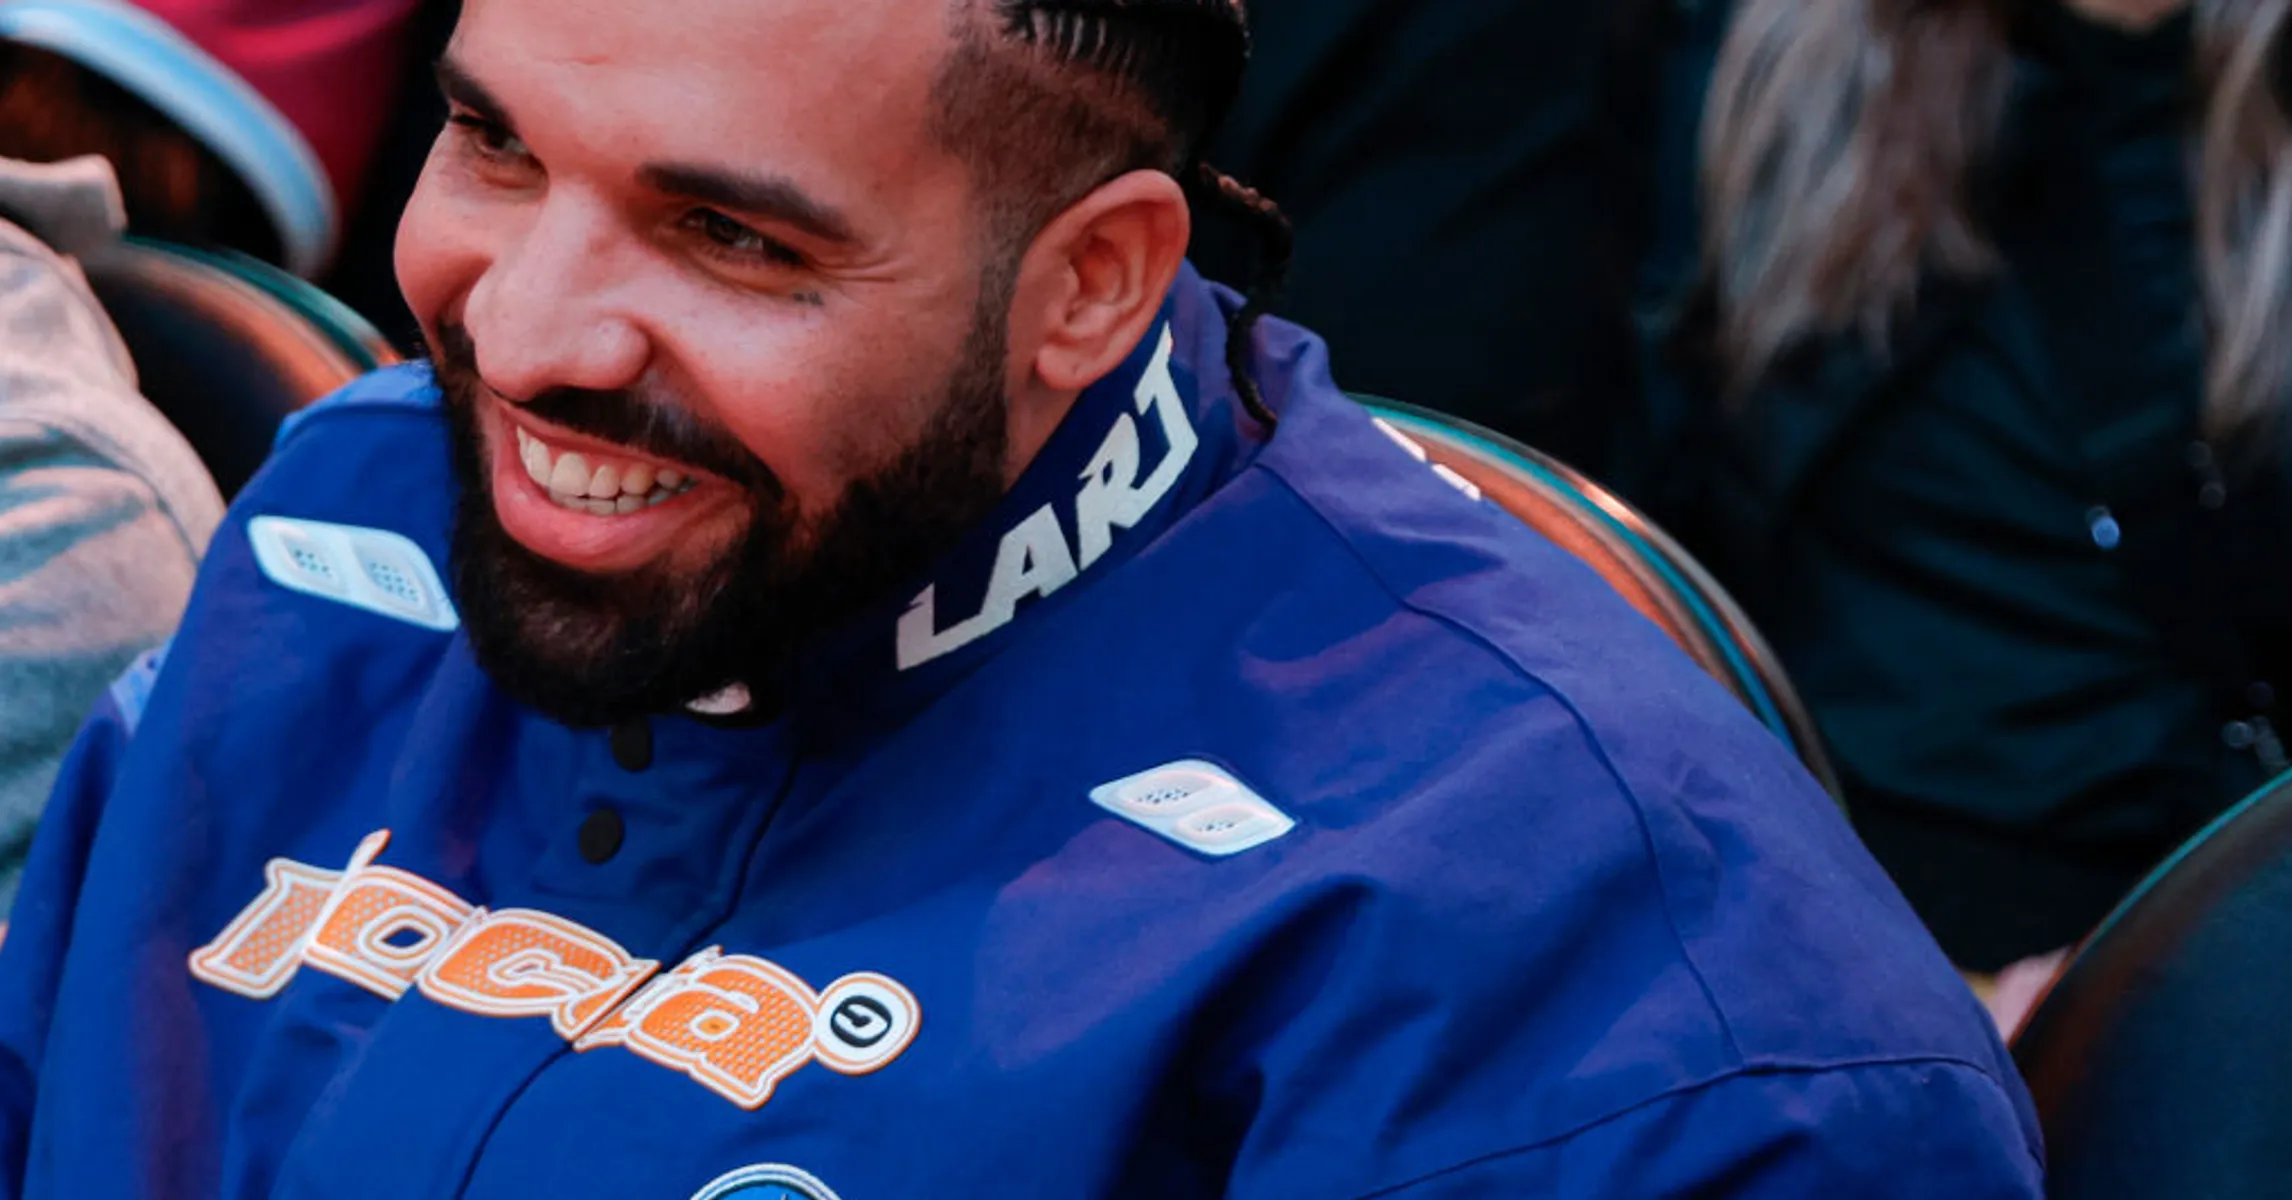 Drake Reacts To Kendrick Lamar Diss While Fans Debate It’s Authenticity